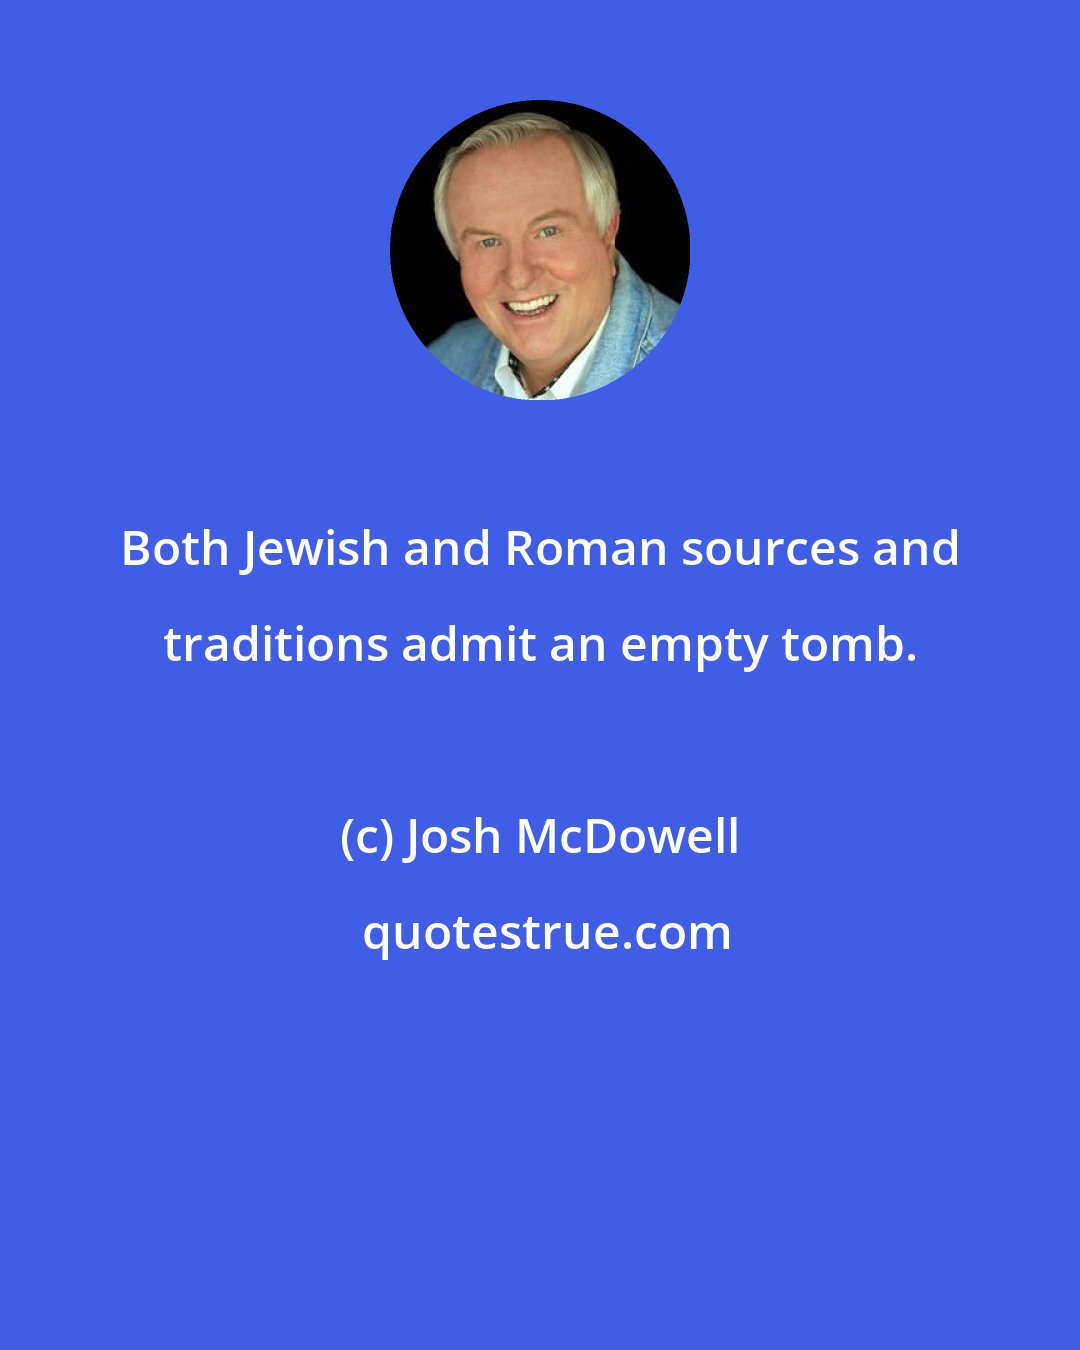 Josh McDowell: Both Jewish and Roman sources and traditions admit an empty tomb.